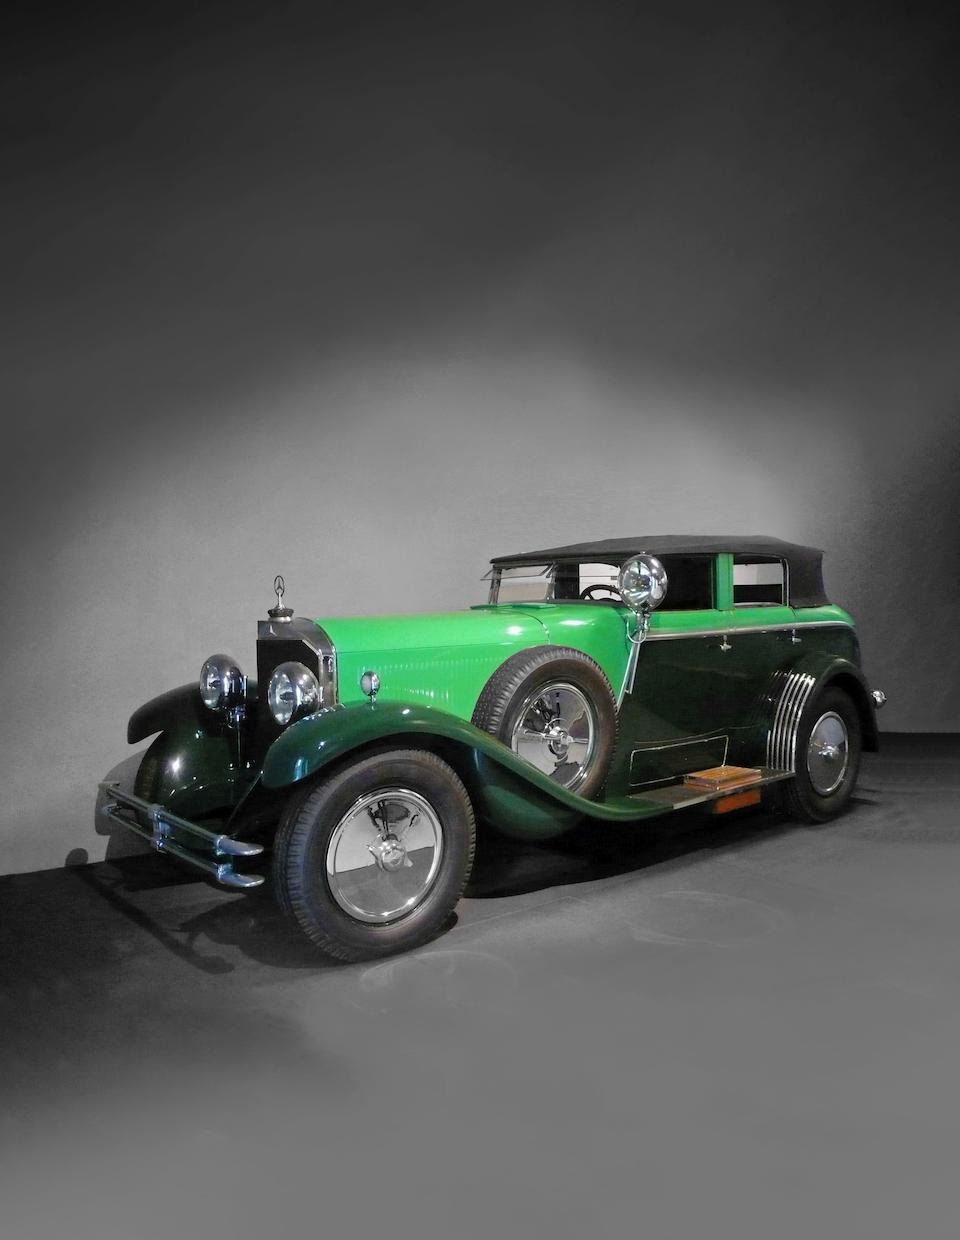 A rare supercharged,1926 MERCEDES-BENZ  24/100/140 PS MODEL K La Baule Transformable  Chassis no. 35426 Engine no. 60616